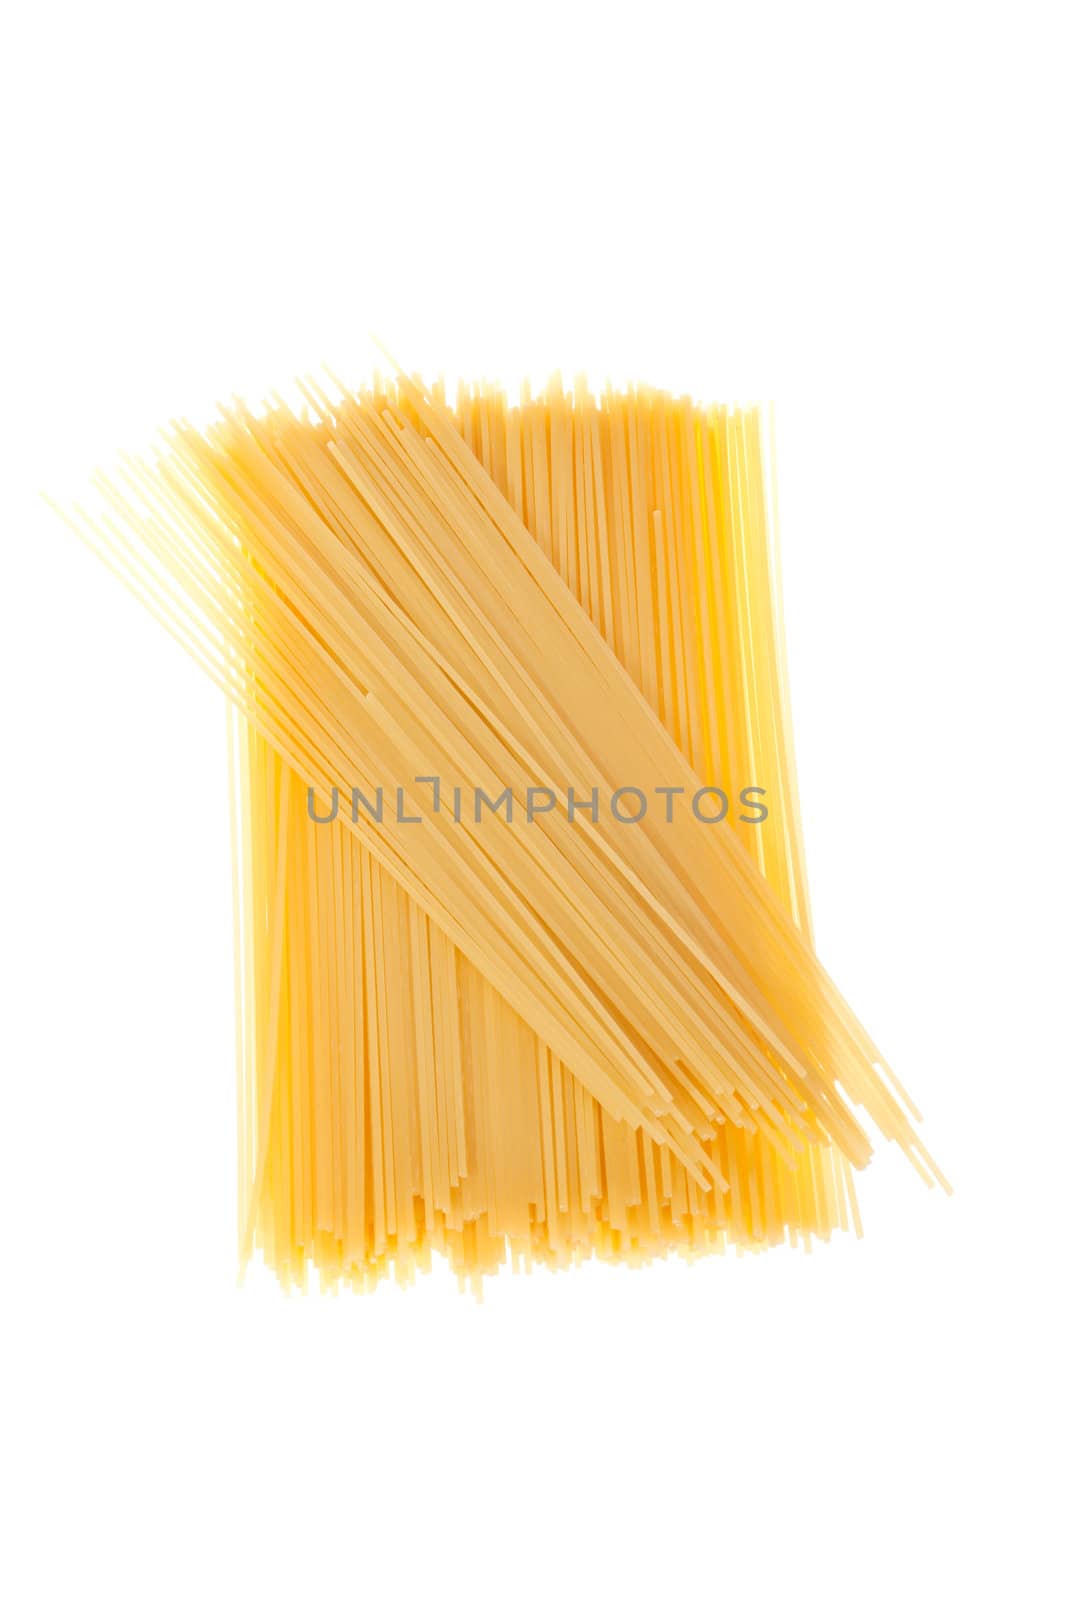 uncooked spaghetti by aguirre_mar